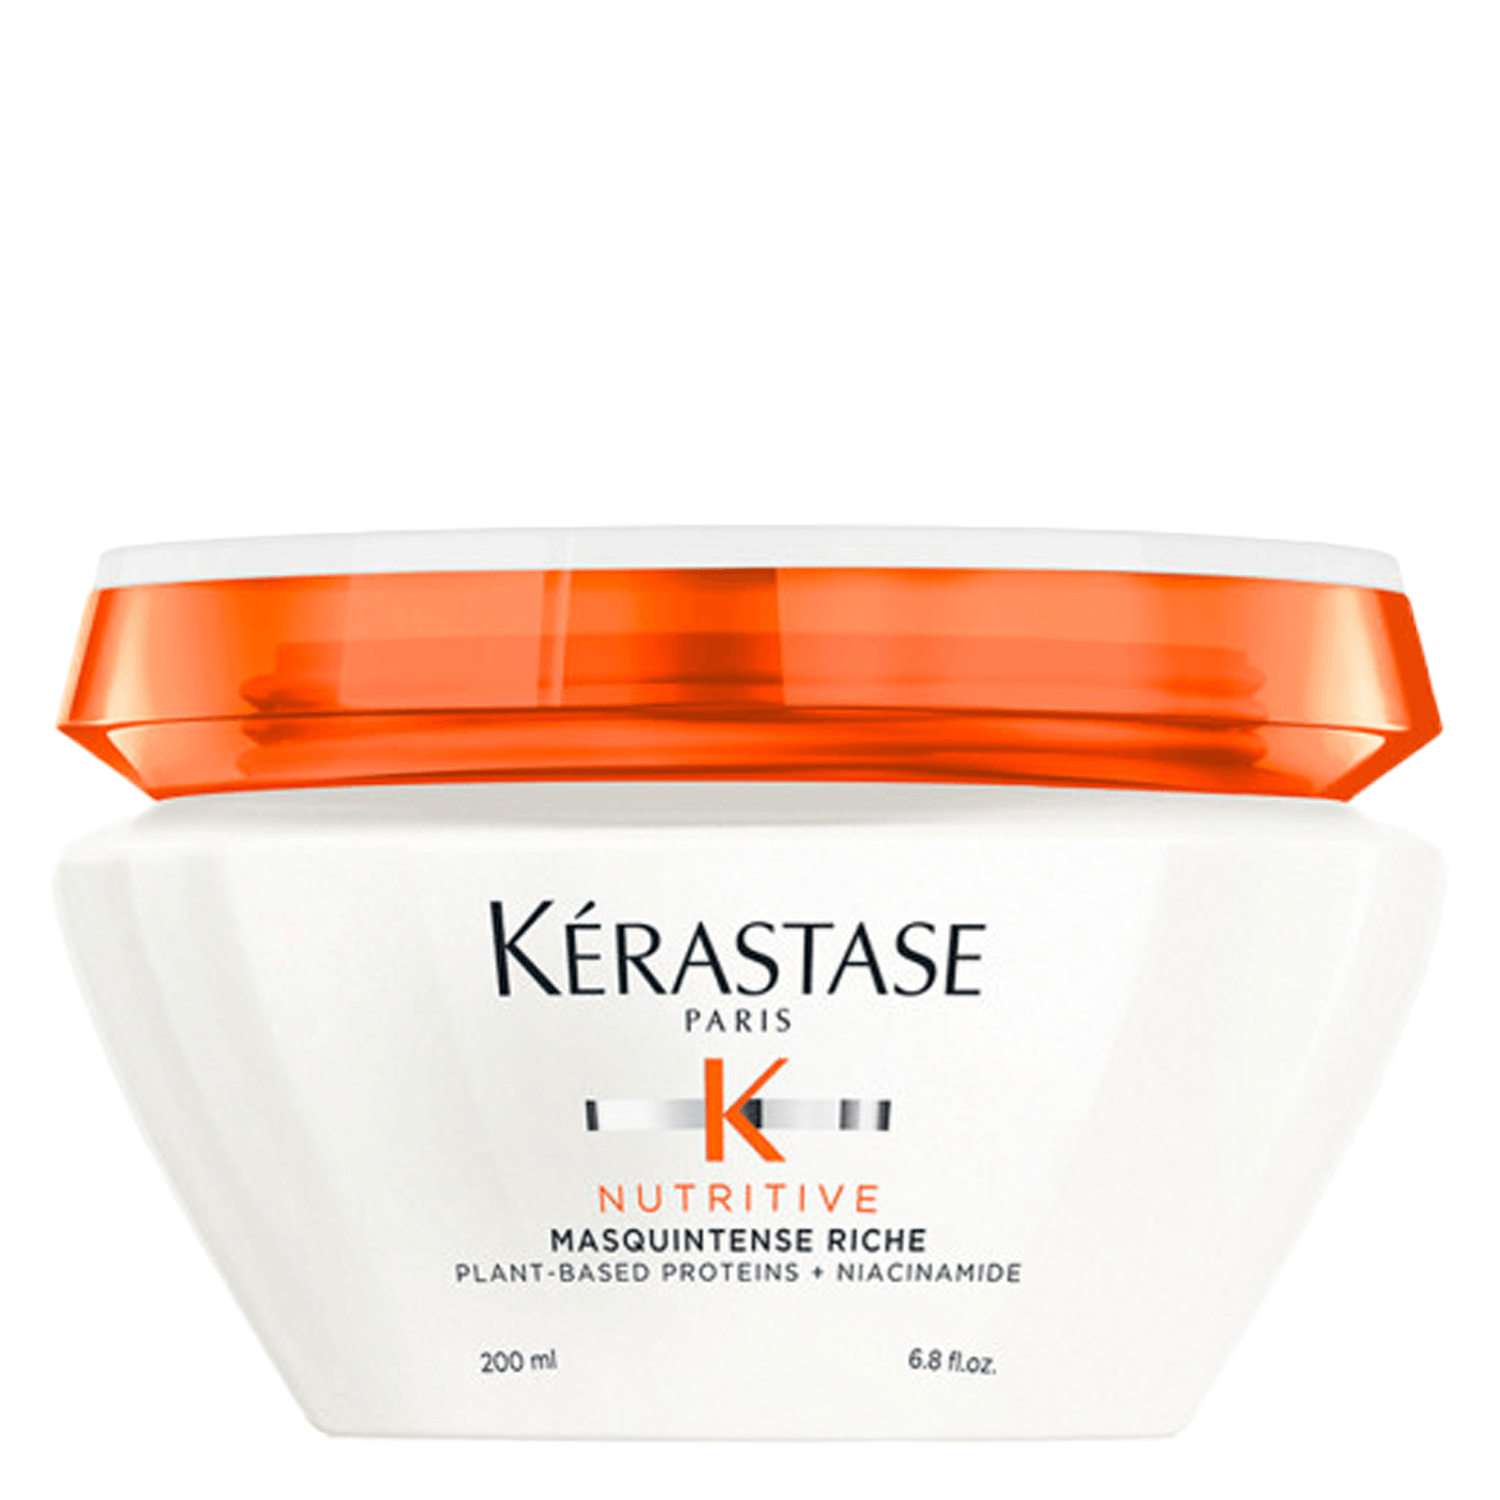 Product image from Nutritive - Masquintense Riche